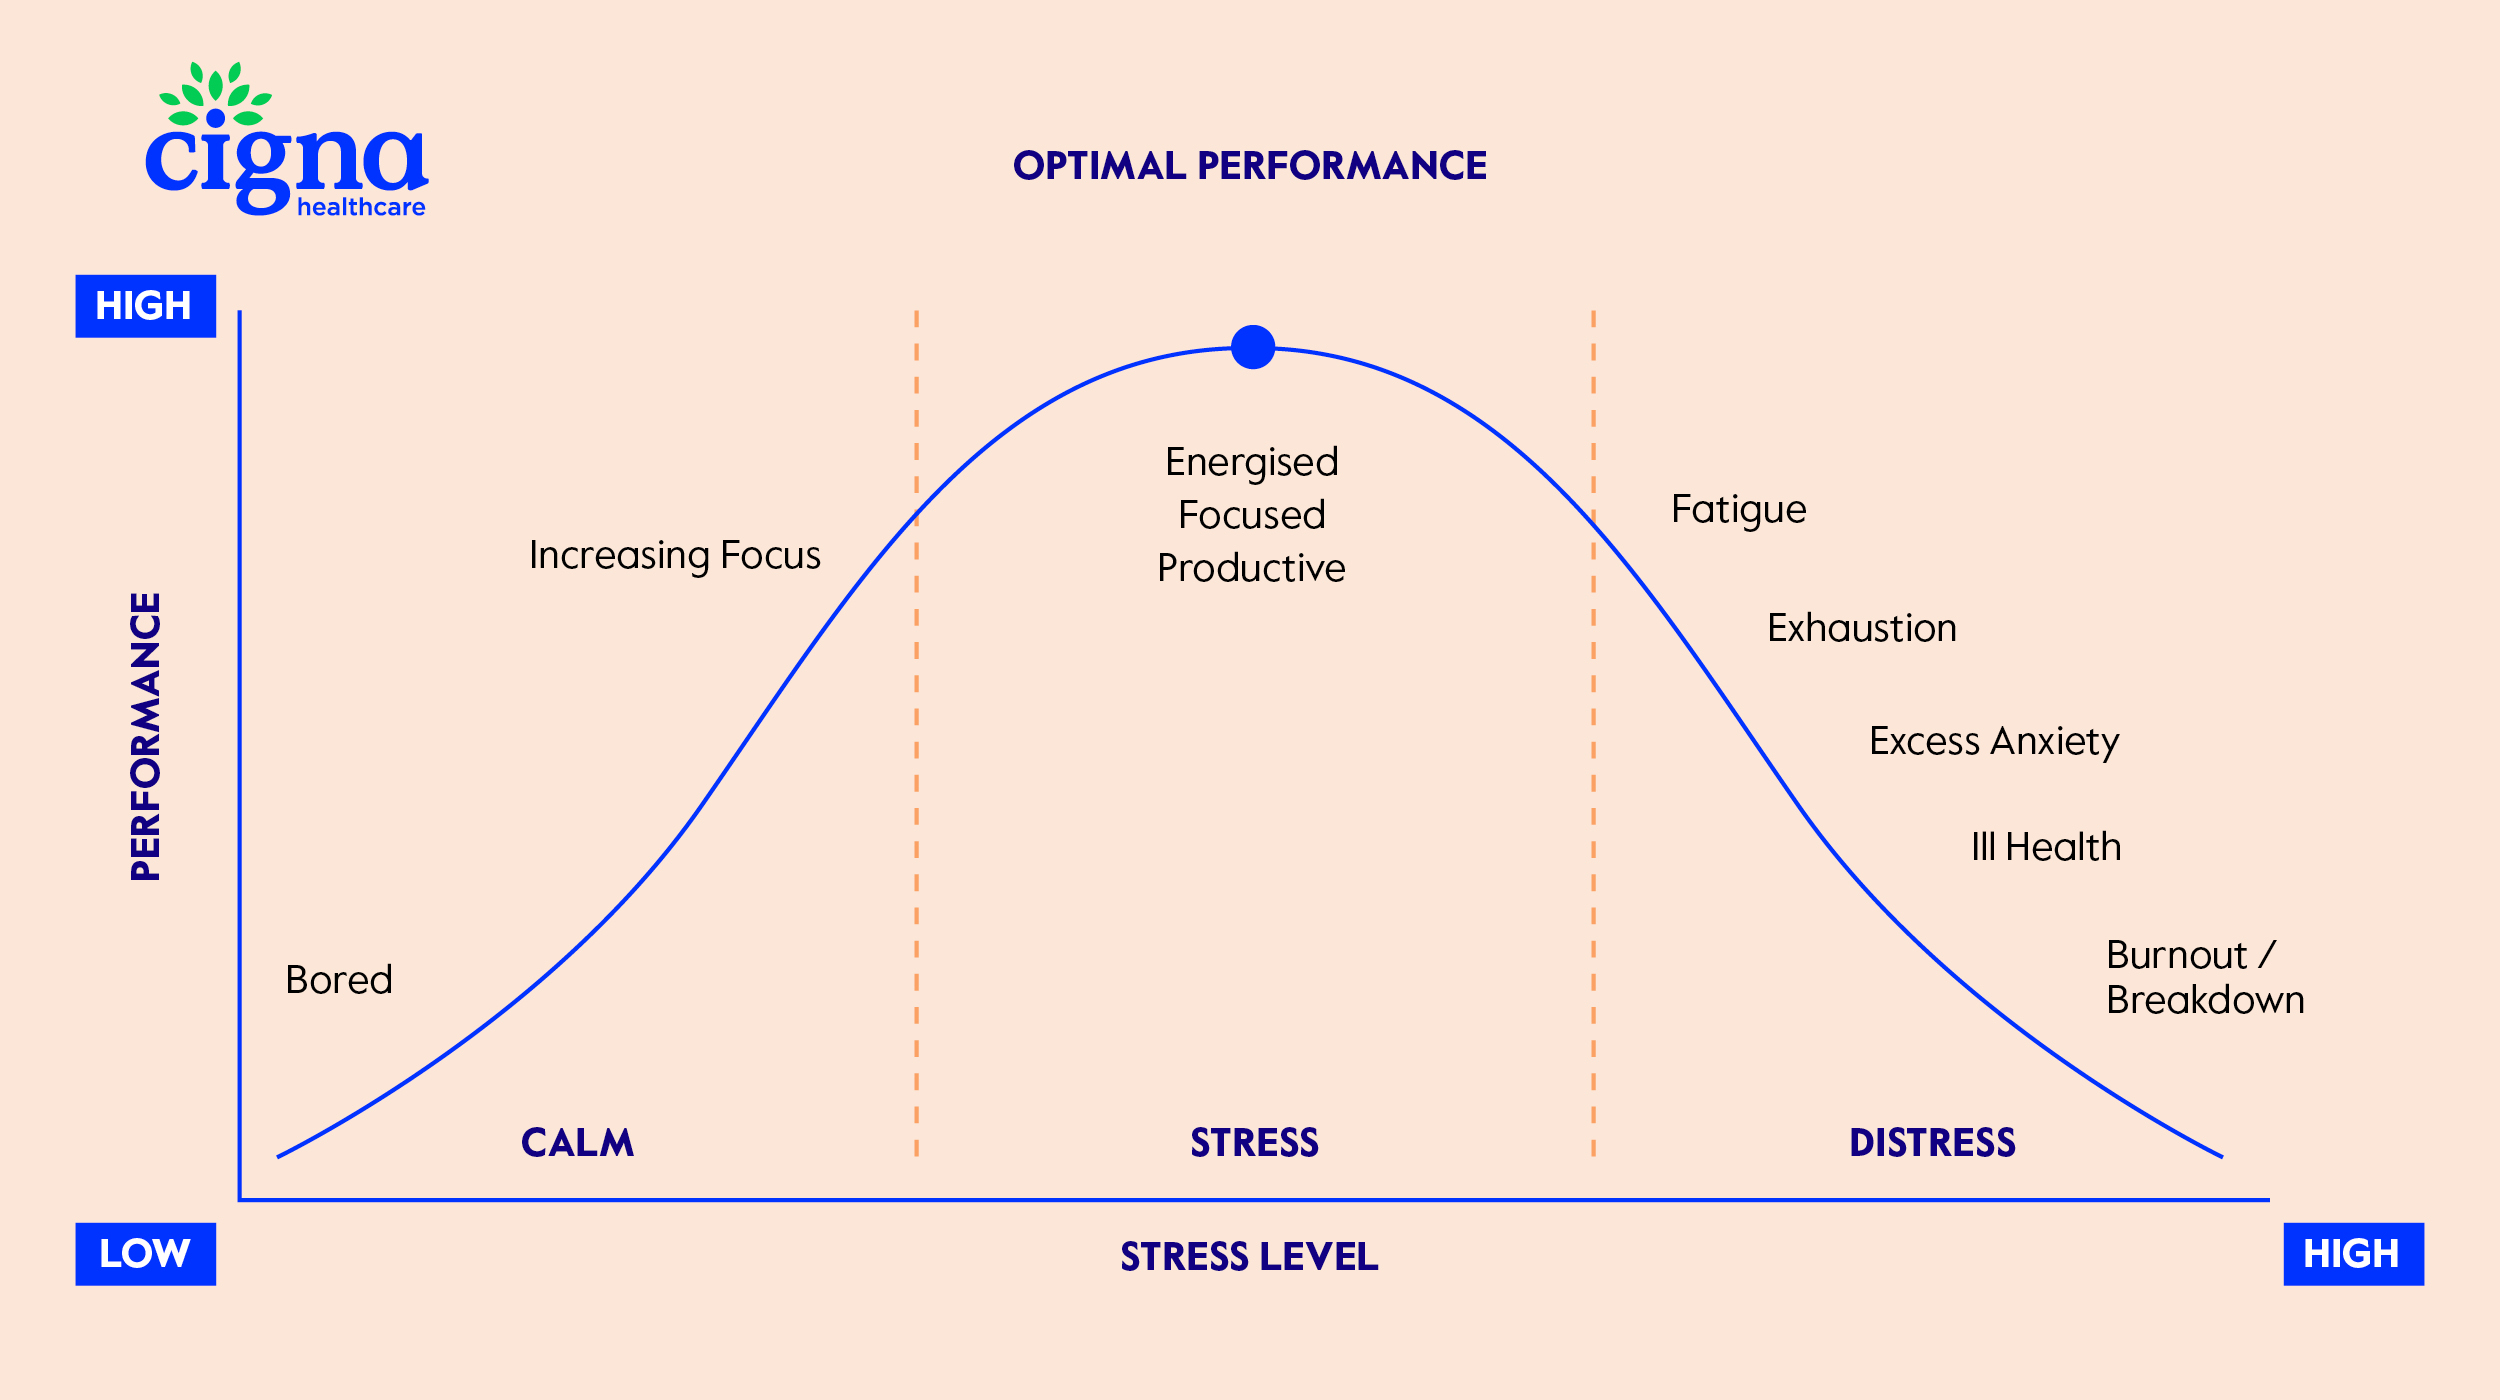 Table of Stress vs Performance